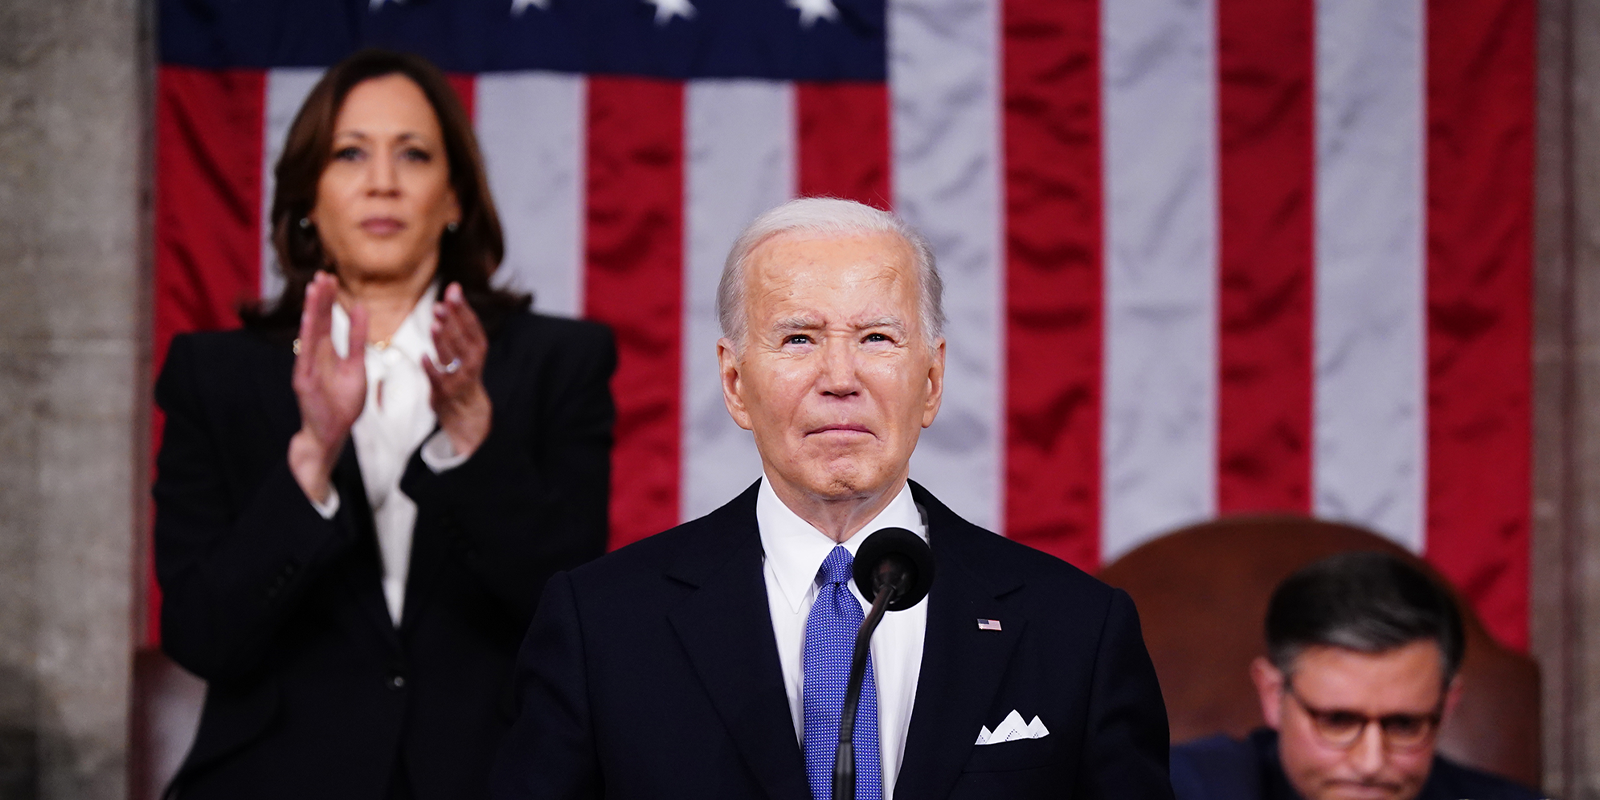 AFSCME supports Biden’s vision for America and will help him execute it